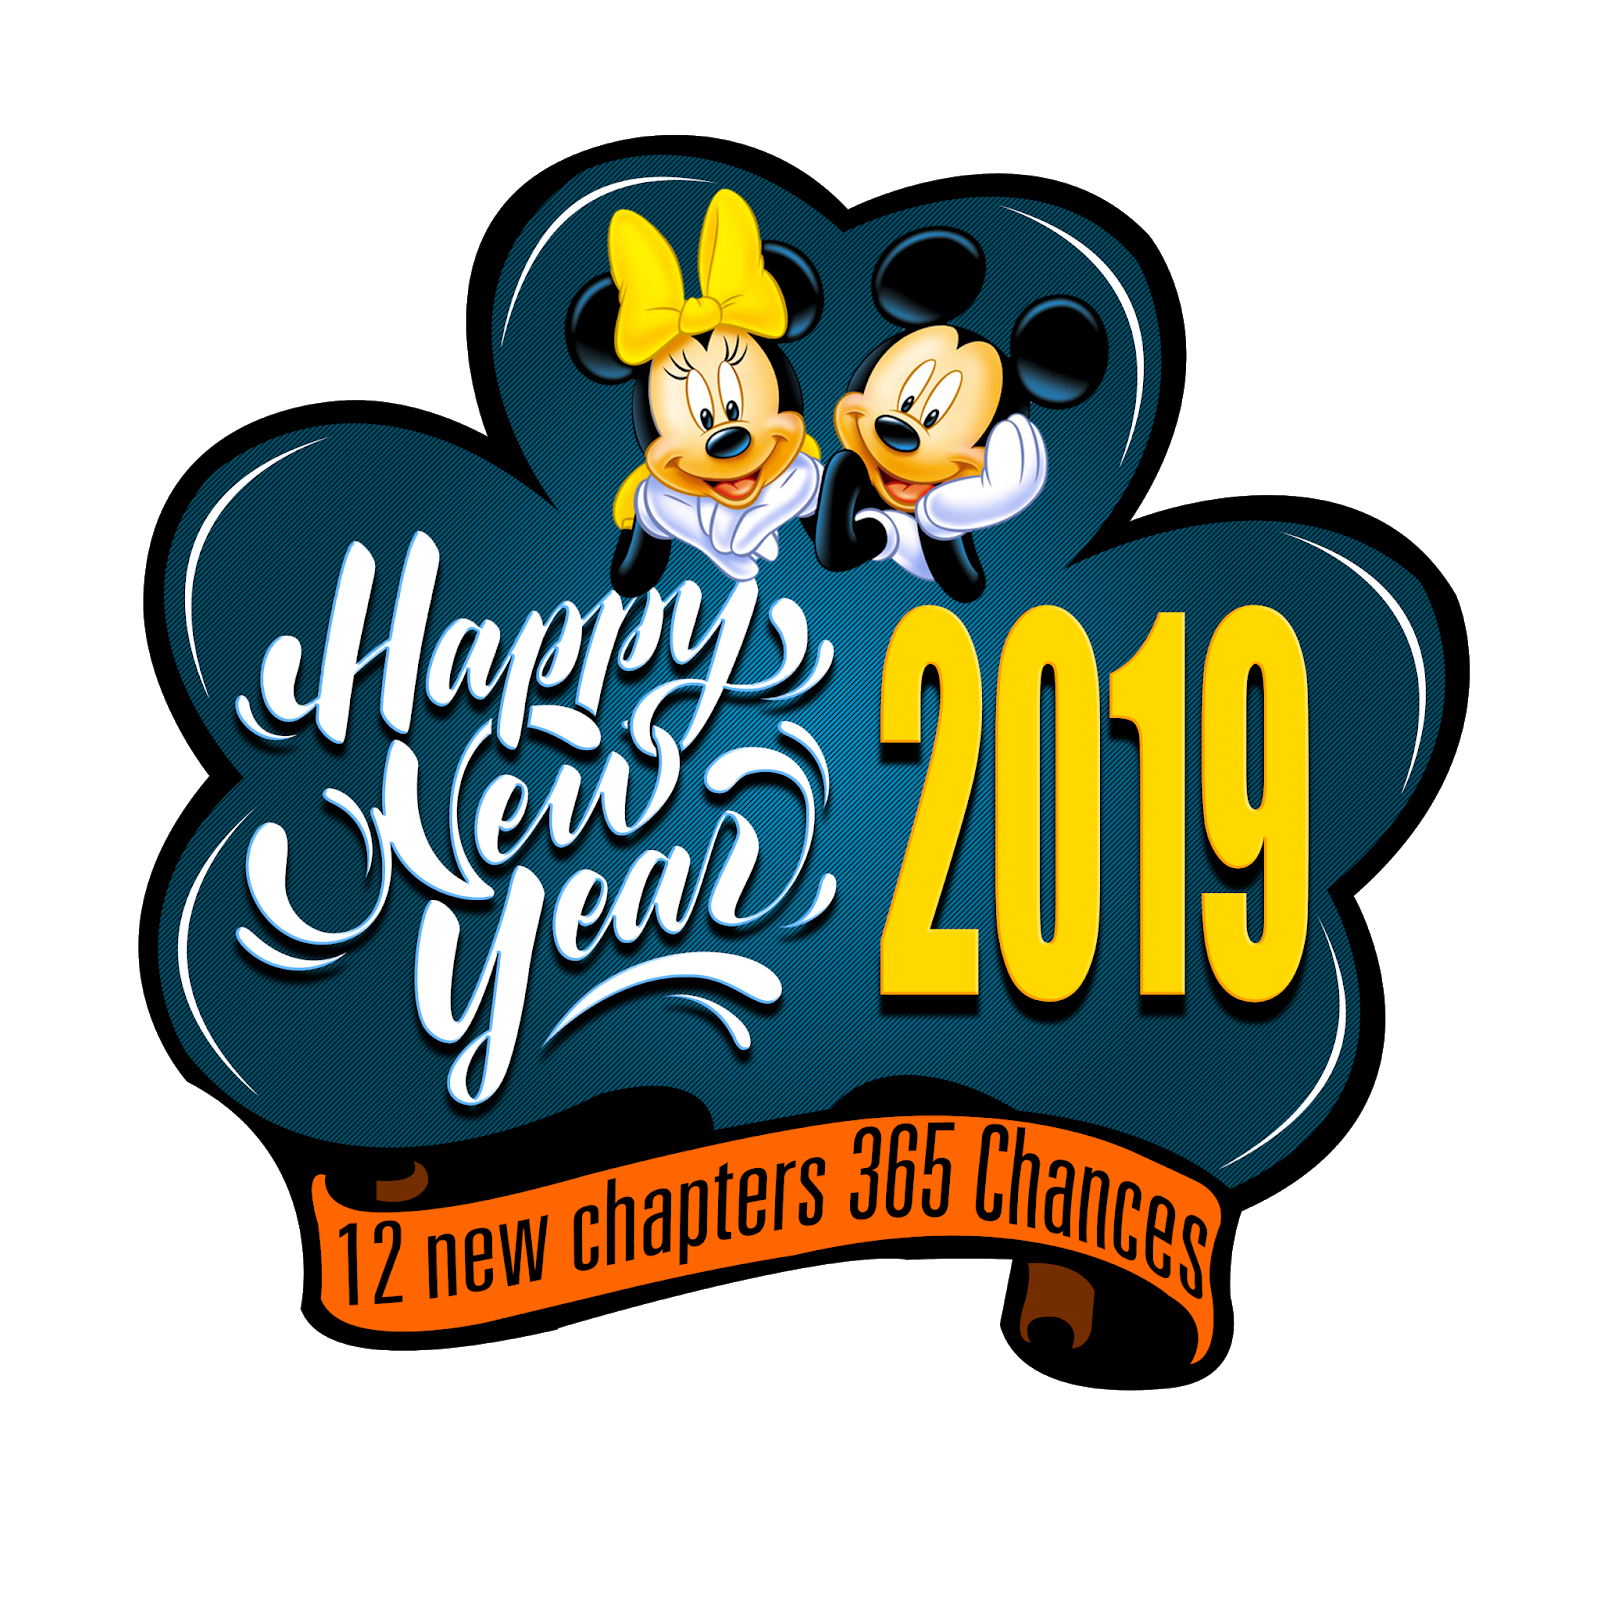 Happy New Year 2019 PNG Images free downloads naveengfx